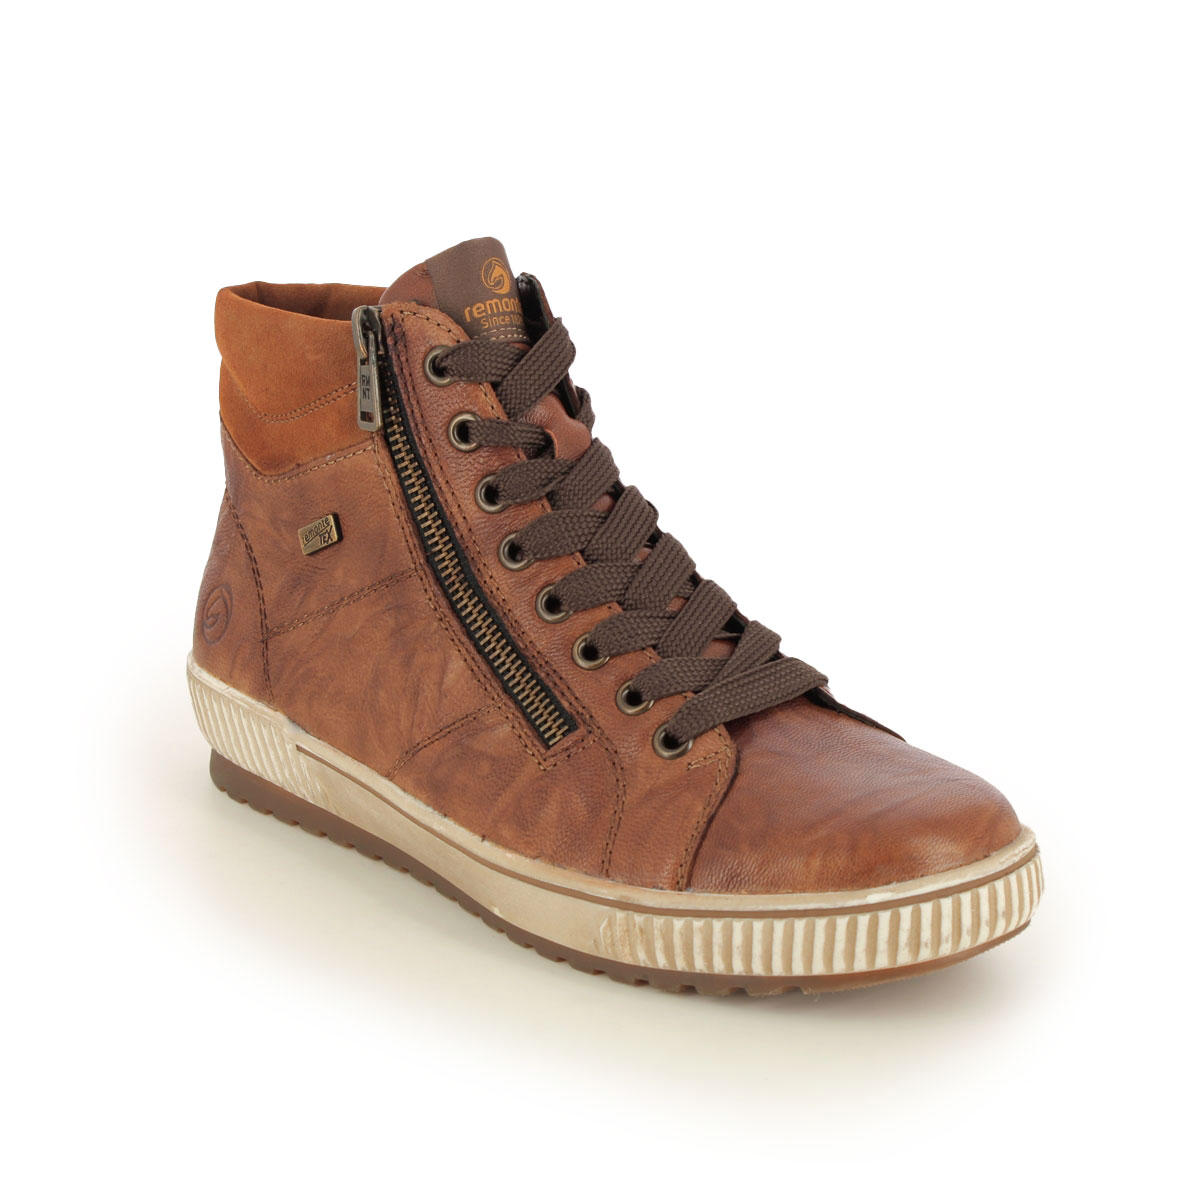 Remonte Tanaloto Tex Tan Leather  Womens Hi Tops D0772-22 In Size 43 In Plain Tan Leather